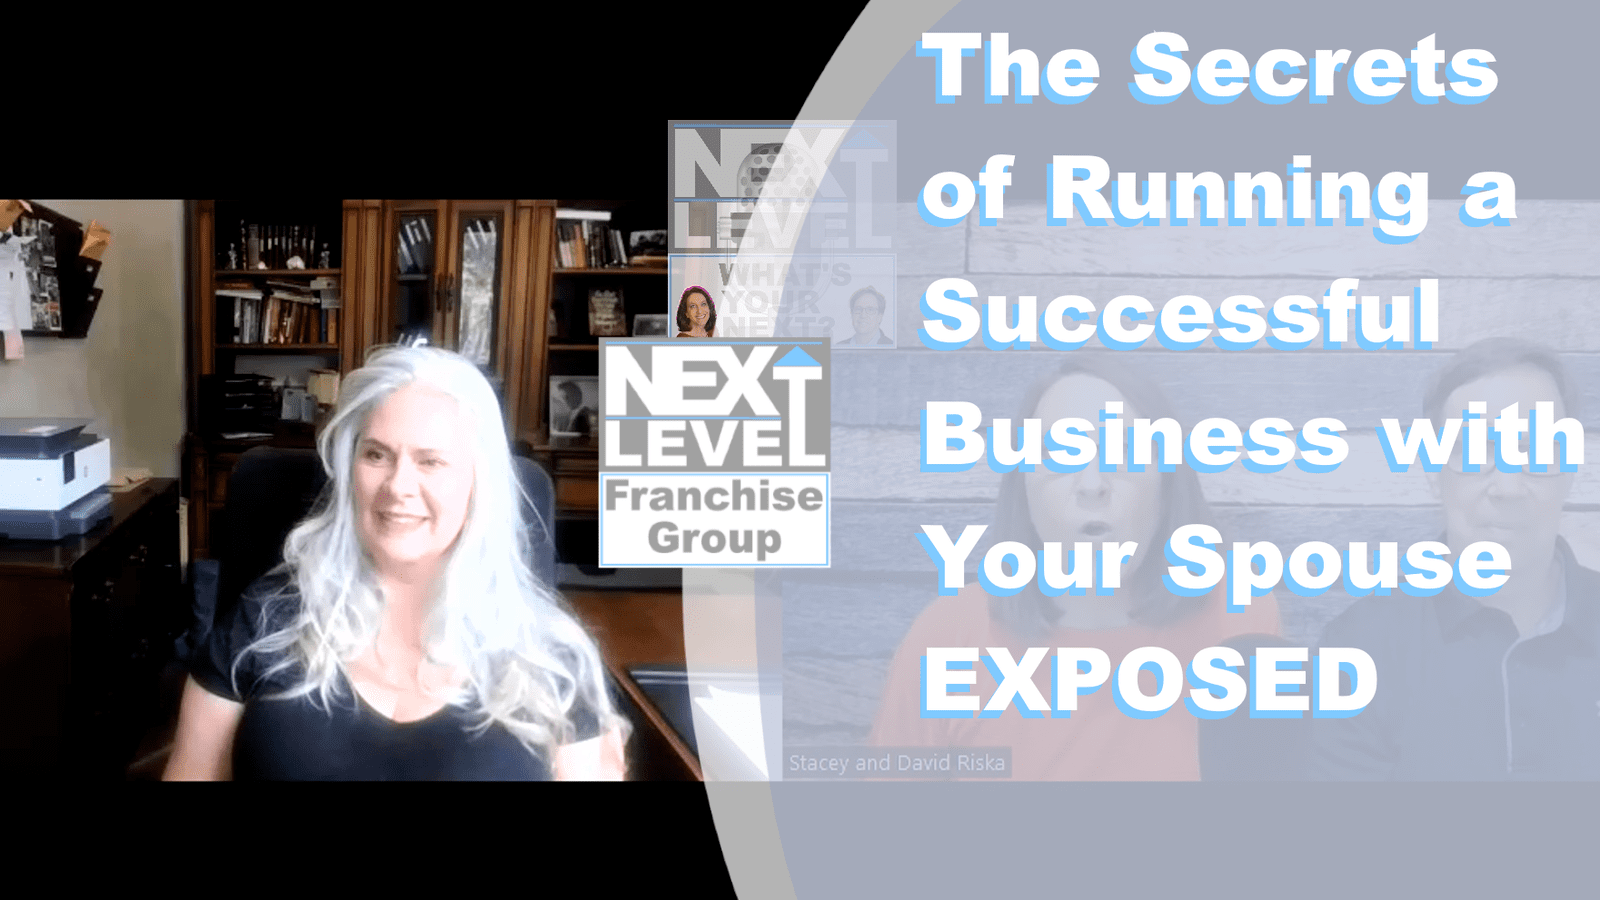 The Secrets of Running a Successful Business with Your Spouse EXPOSED